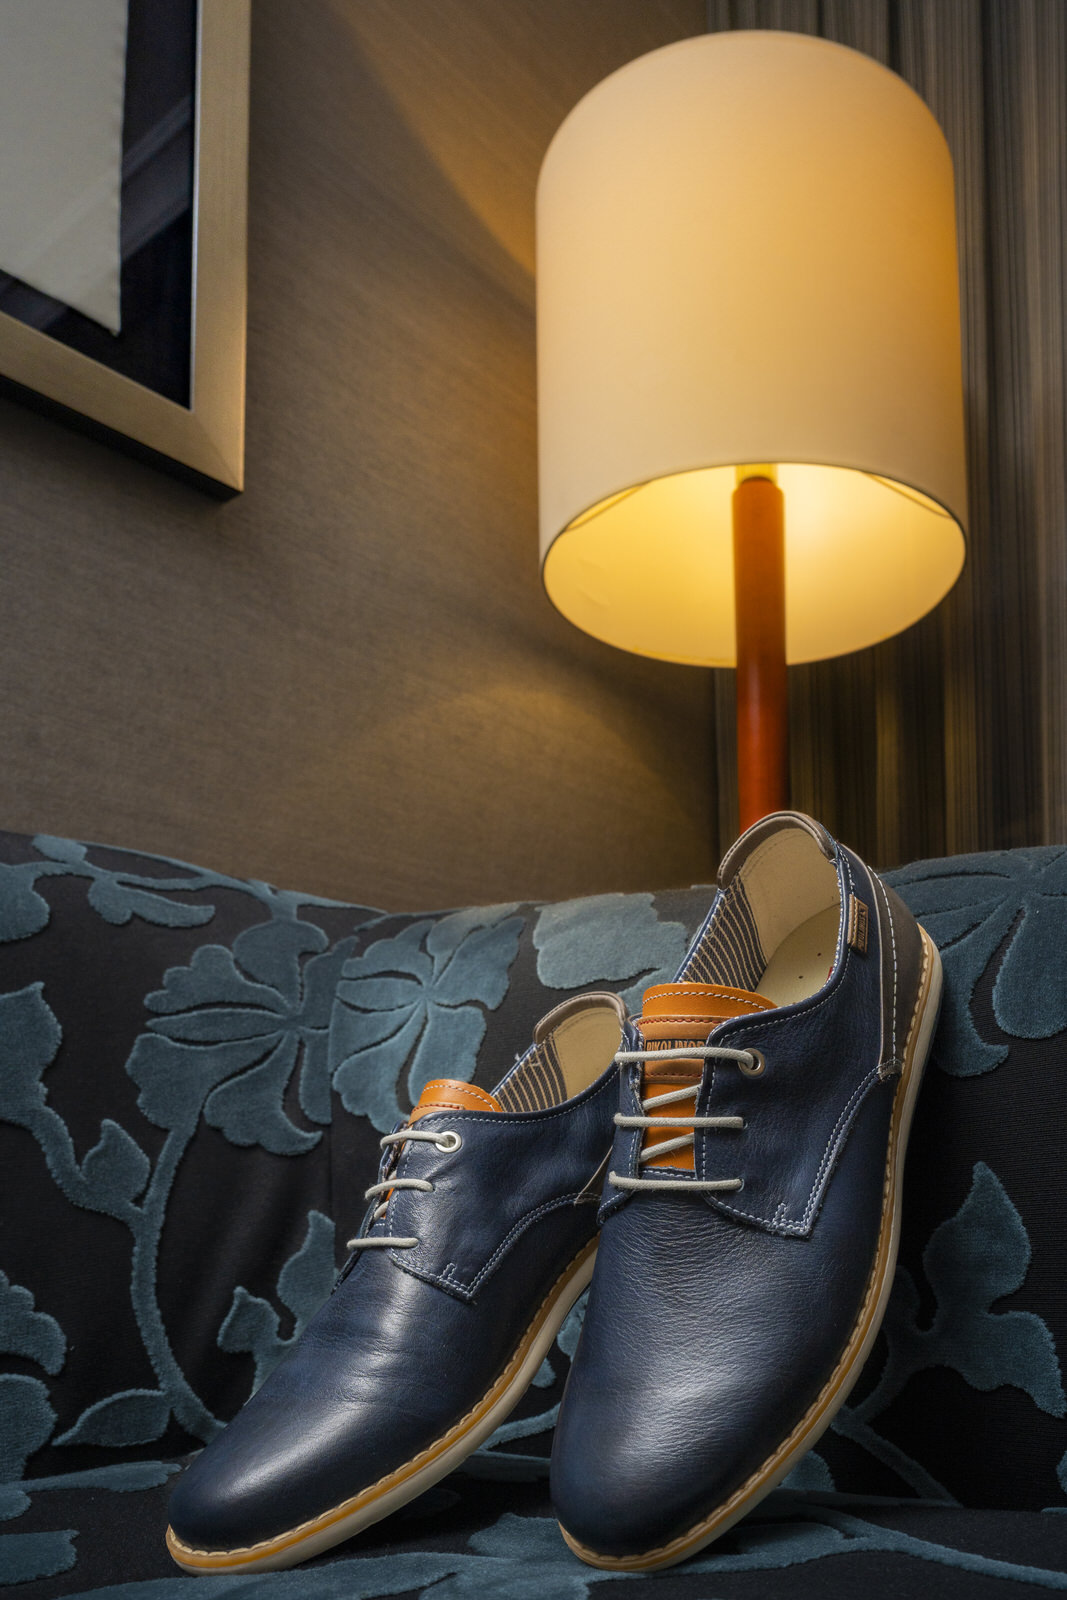 Image of a pair of Pikolinos men's shoes on a sofa, with a lamp behind